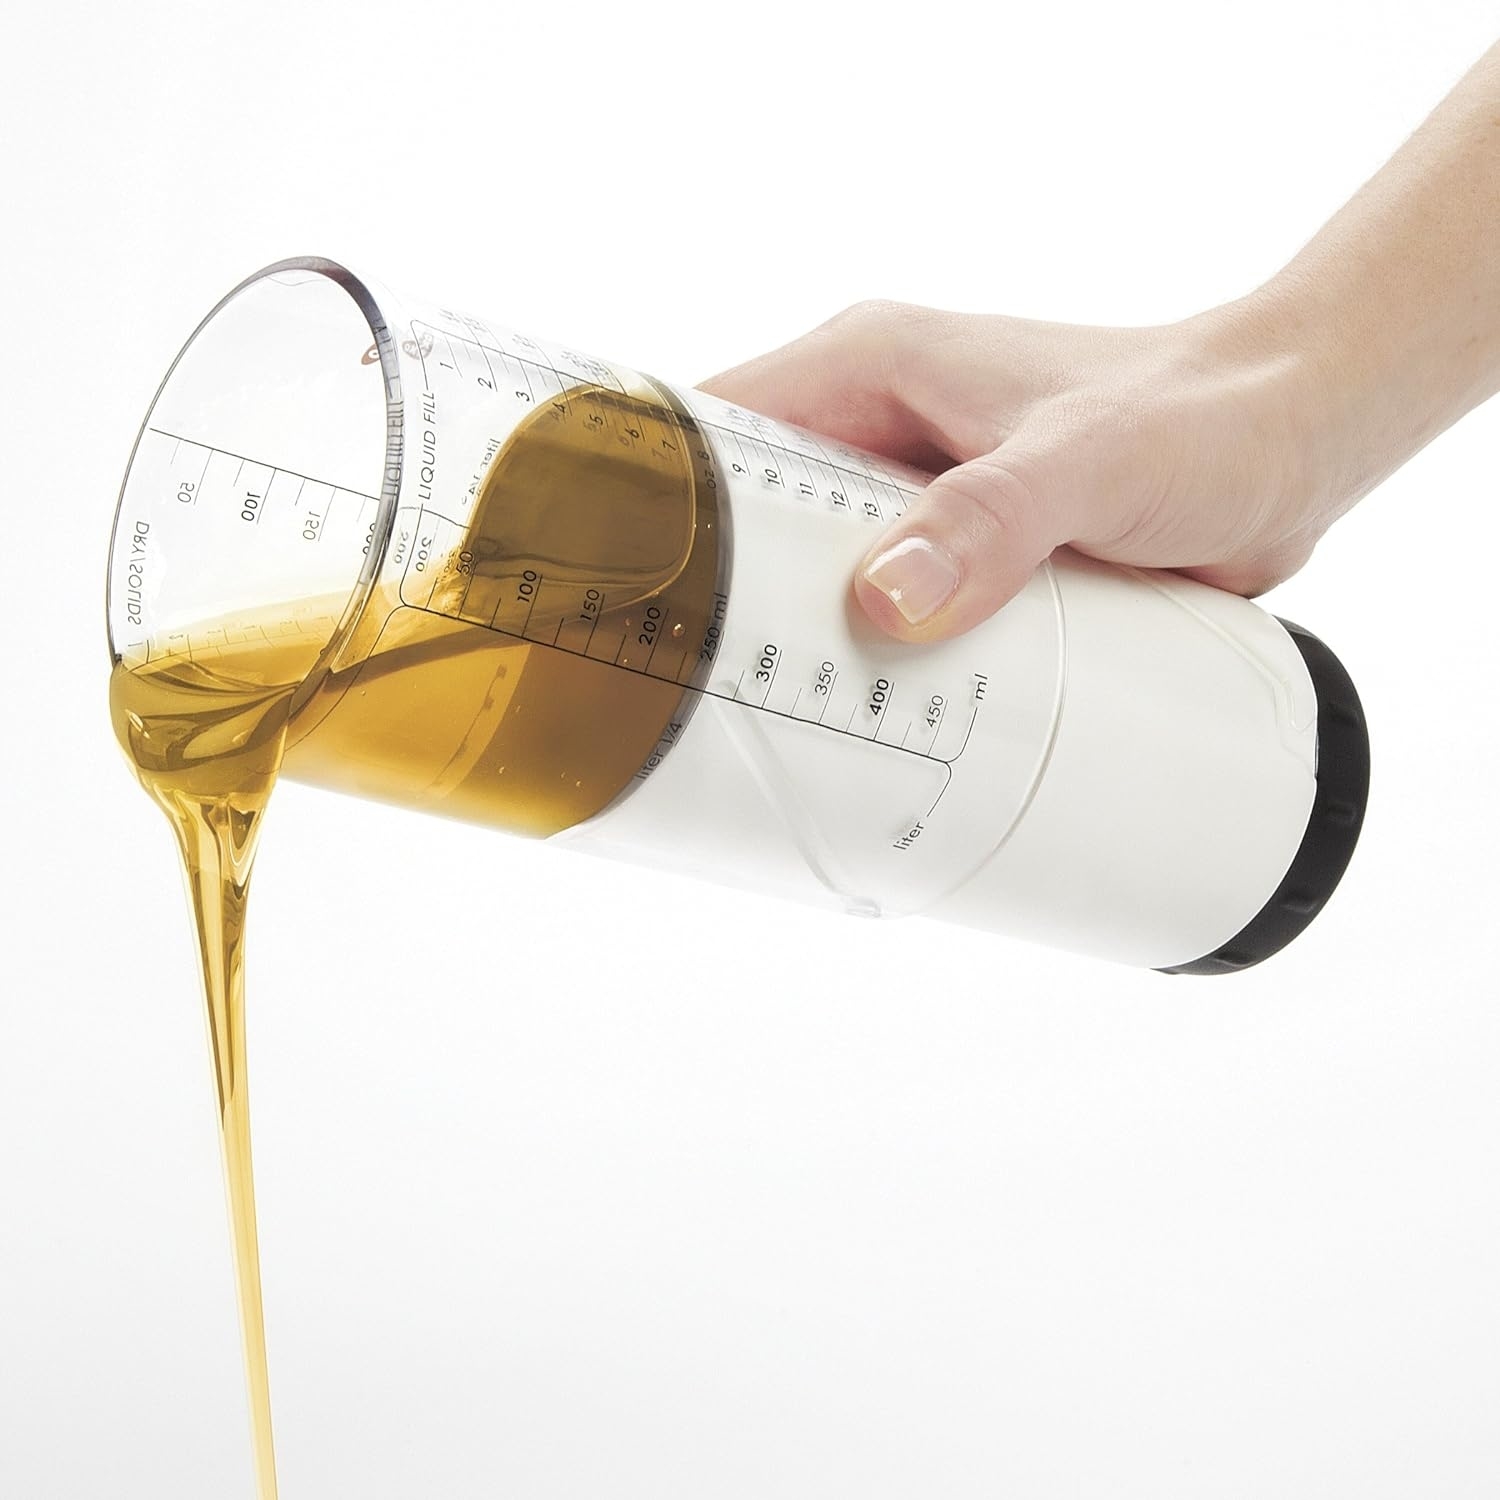 Hand pouring honey from a clear, measuring dispenser against a white background